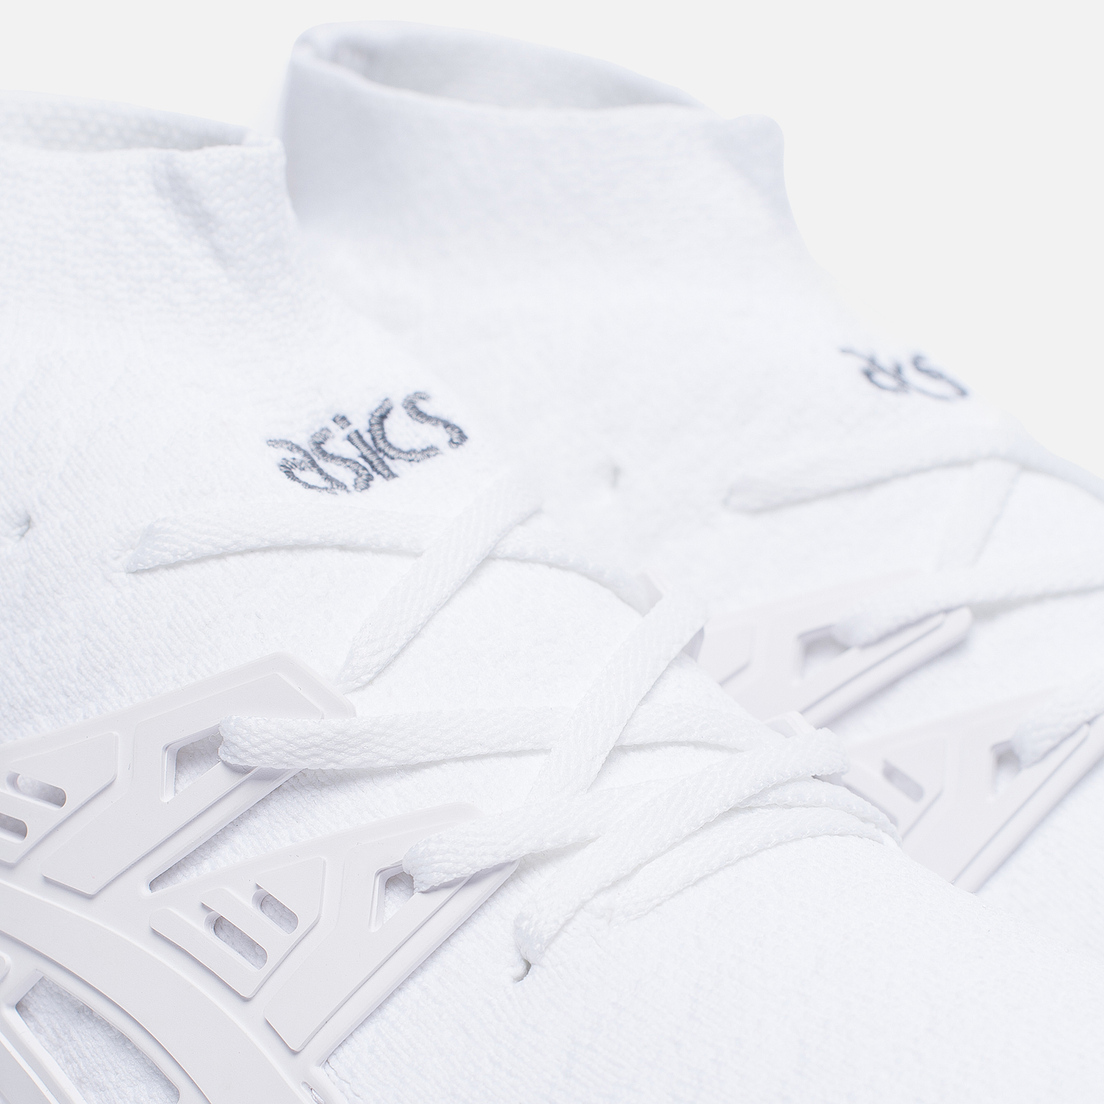 ASICS Кроссовки Gel-Kayano Trainer Knit MT Light And Shade Pack